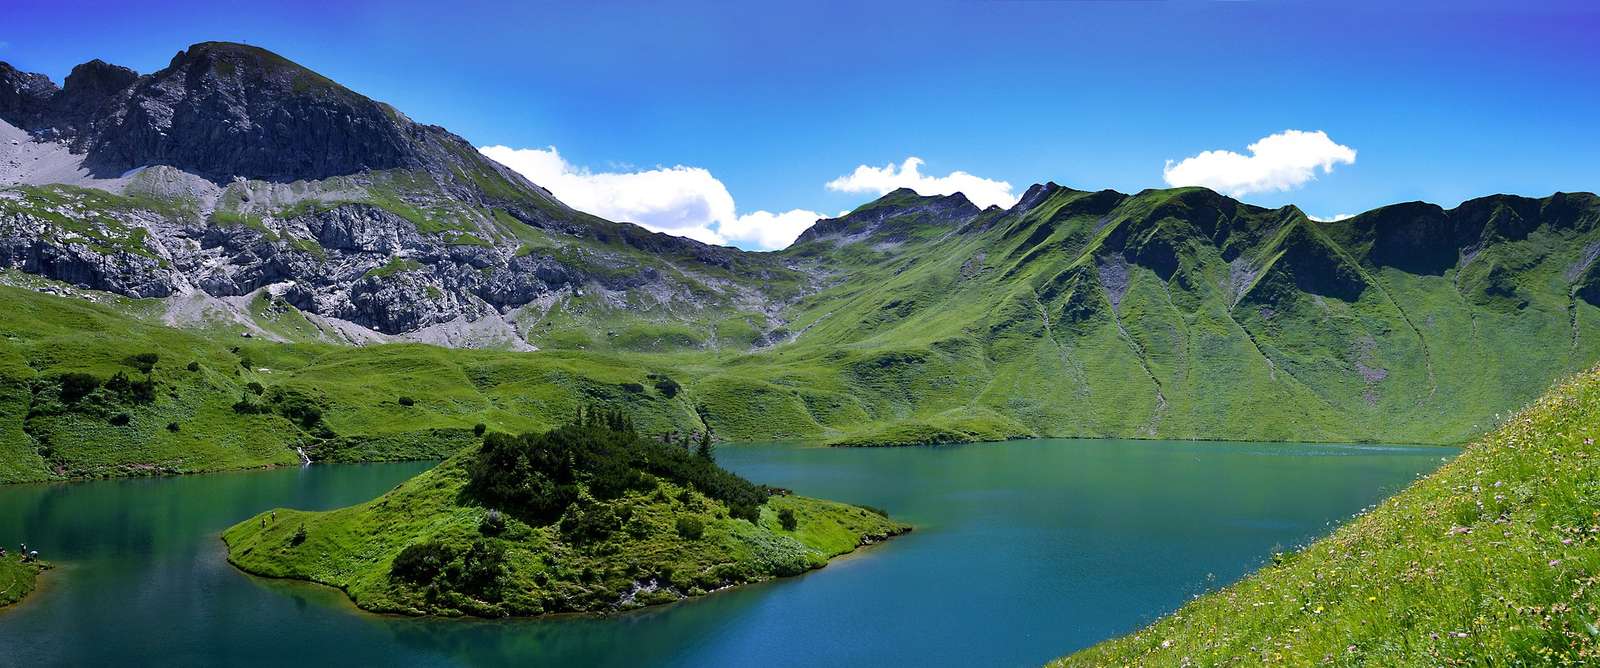 High mountain lake jigsaw puzzle online